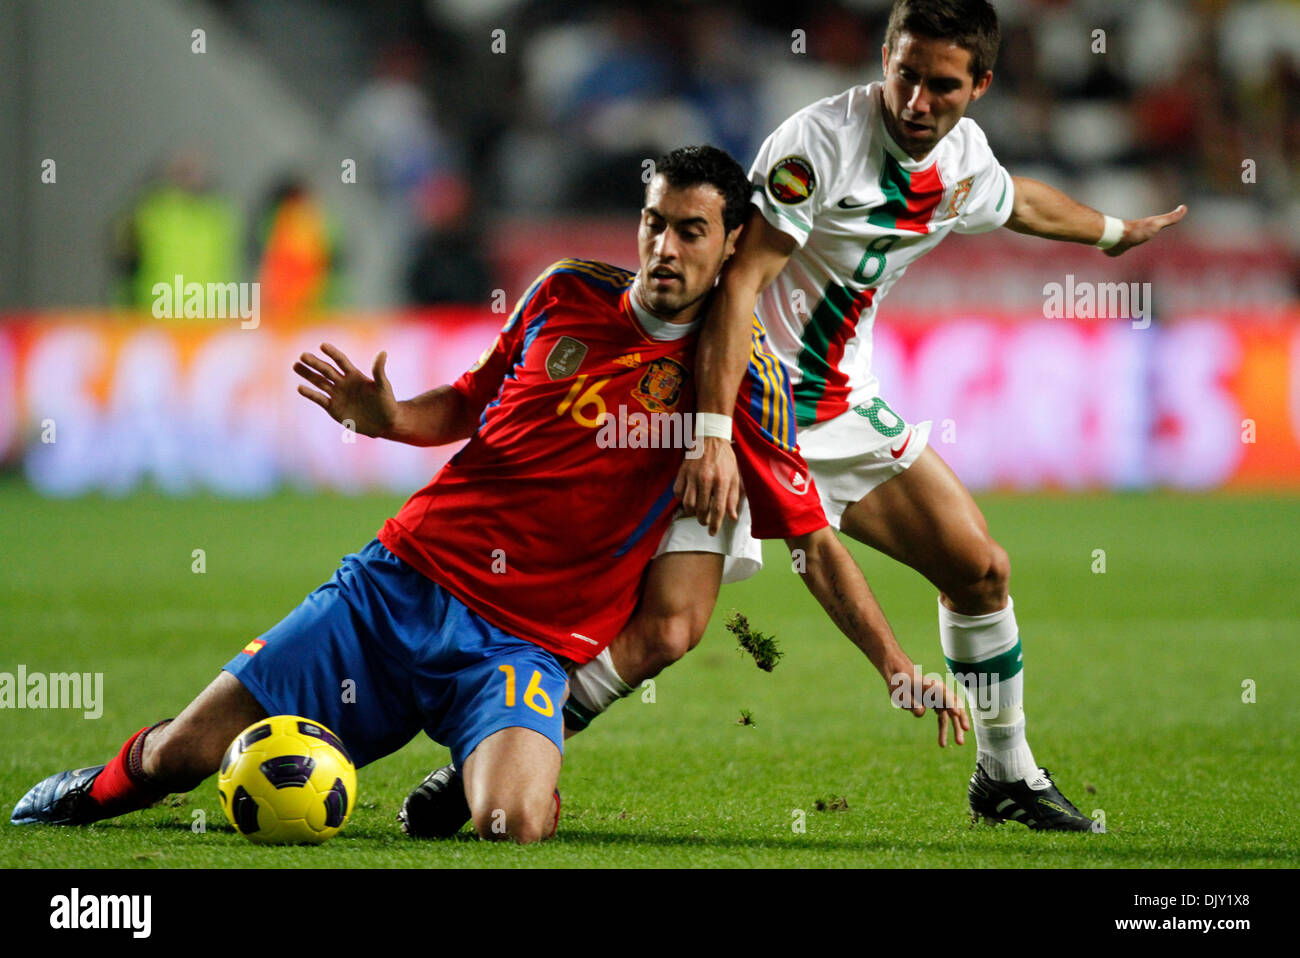 Nov 17, 2010 - Lisbon, Portugal - Portuguese JOAO MOUTINHO (R) vies with Spanish SERGIO BUSQUETS (L) during their soccer match to promote the candidacy of the two countries to the World Cup for 2018 and 2022 at Luz Stadium in Lisbon. (Credit Image: © Paul Cordeiro/ZUMApress.com) Stock Photo